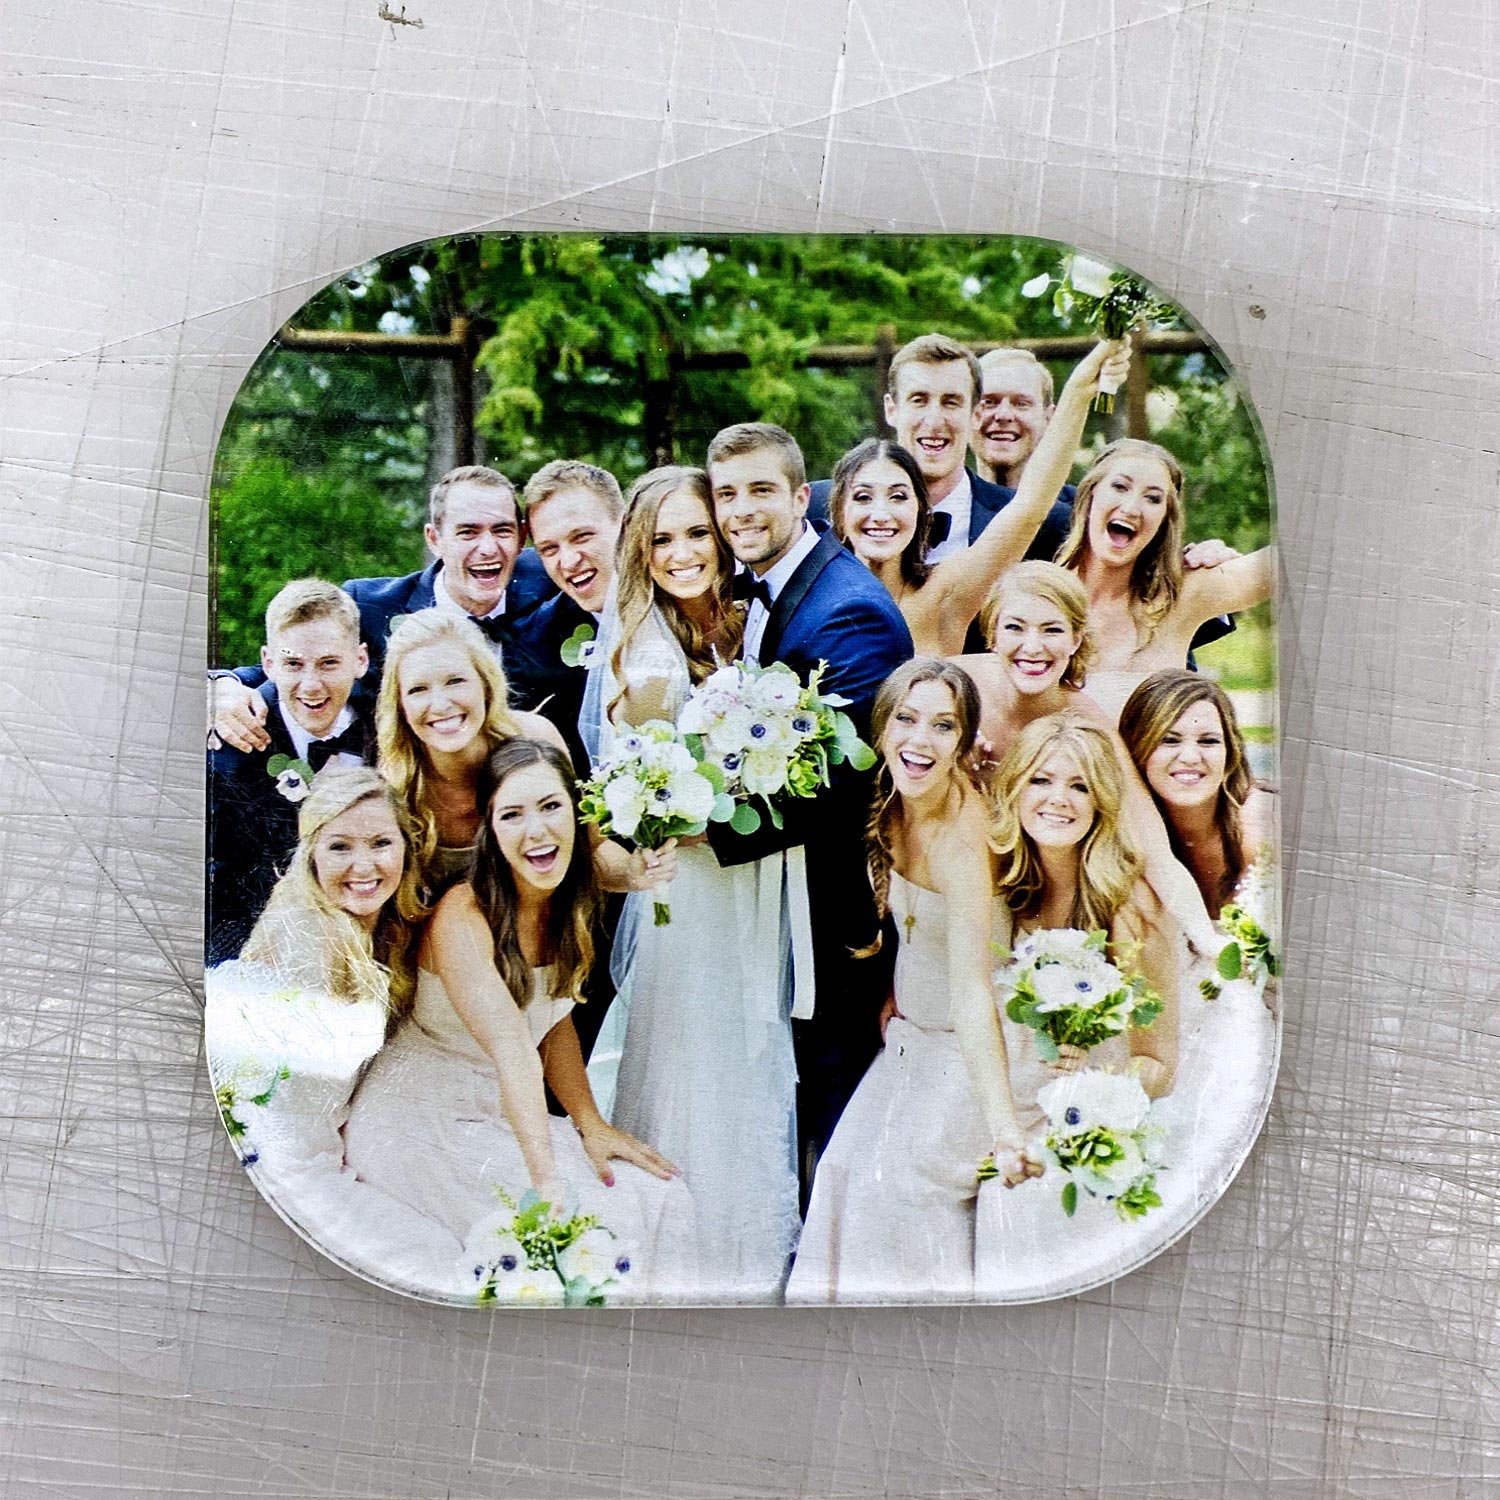 personalised coaster printing for weddings and events with family stockport manchester uk